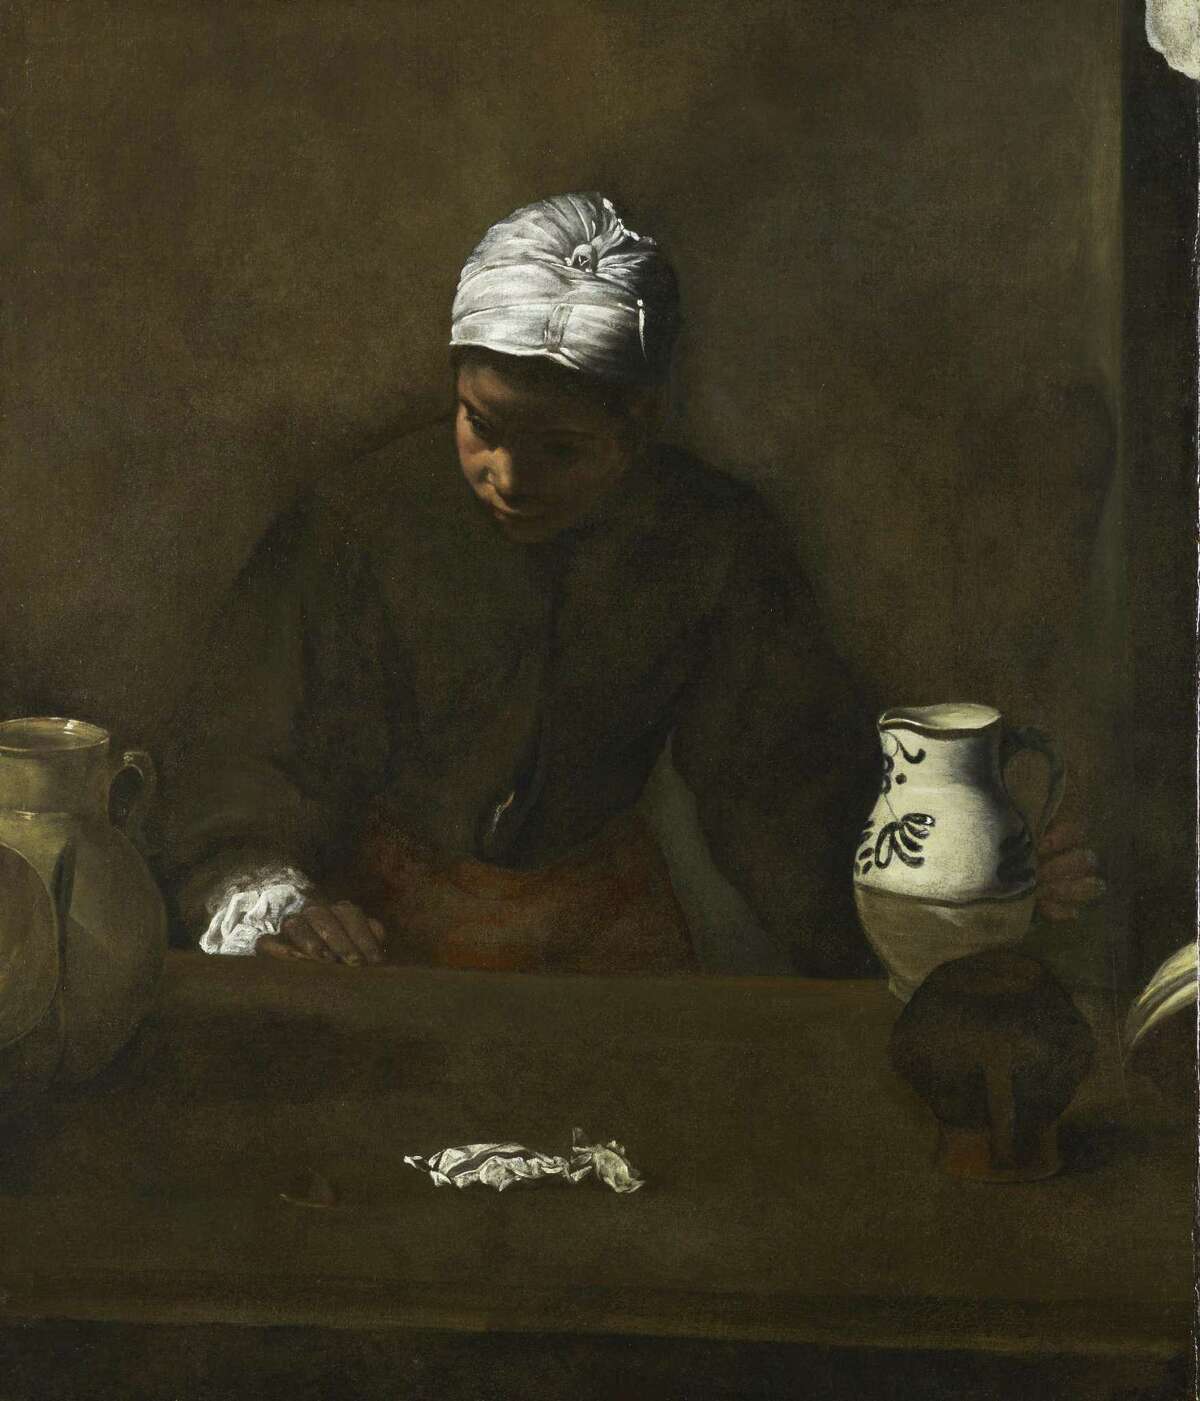 Soni Bomford identified and restored Diego Velazquez’ "Kitchen Maid," which for years hung in an obscure spot at Rienzi. It is now on view in the European galleries of the Museum of Fine Arts, Houston's Beck building.